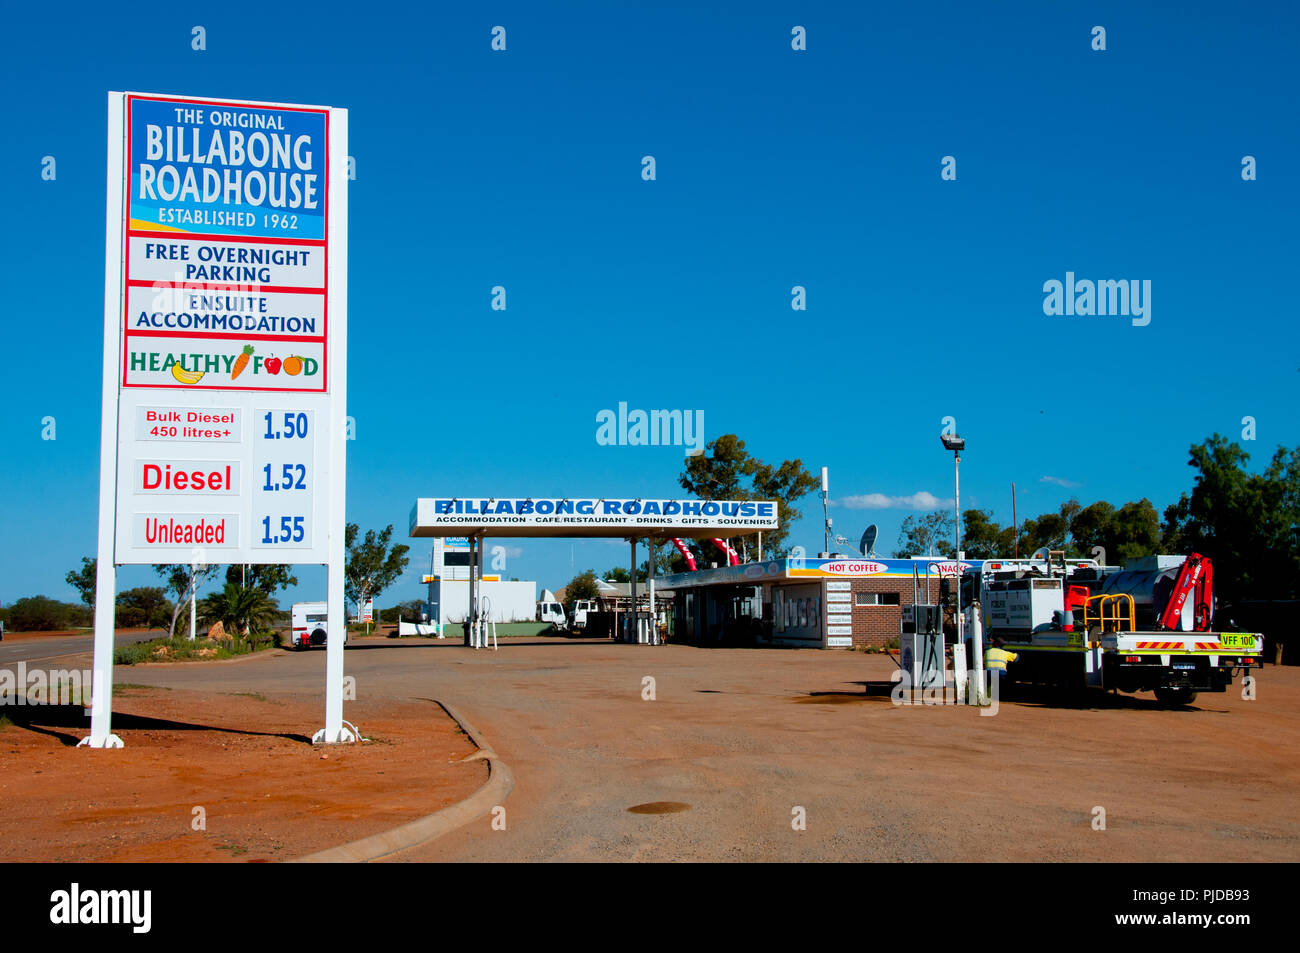 BILLABONG, AUSTRALIA - August 20, 2018: Historic Billabong Roadhouse opened and operating since 1962 Stock Photo